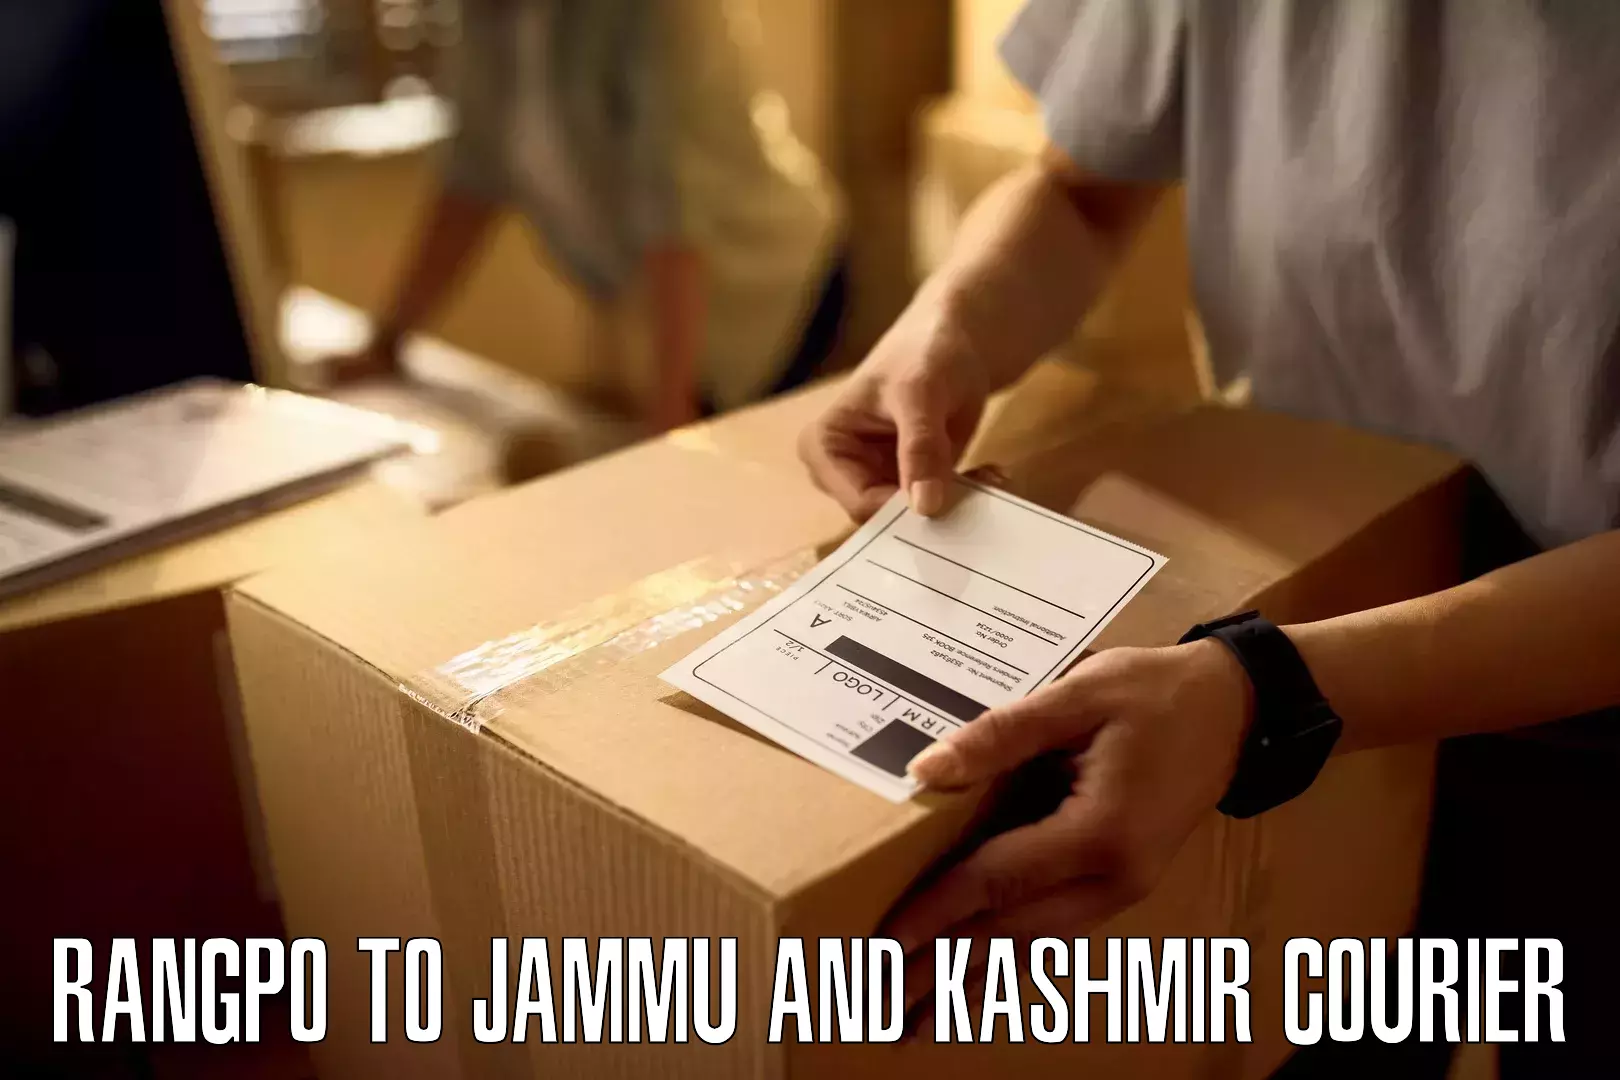 Speedy delivery service Rangpo to Jammu and Kashmir